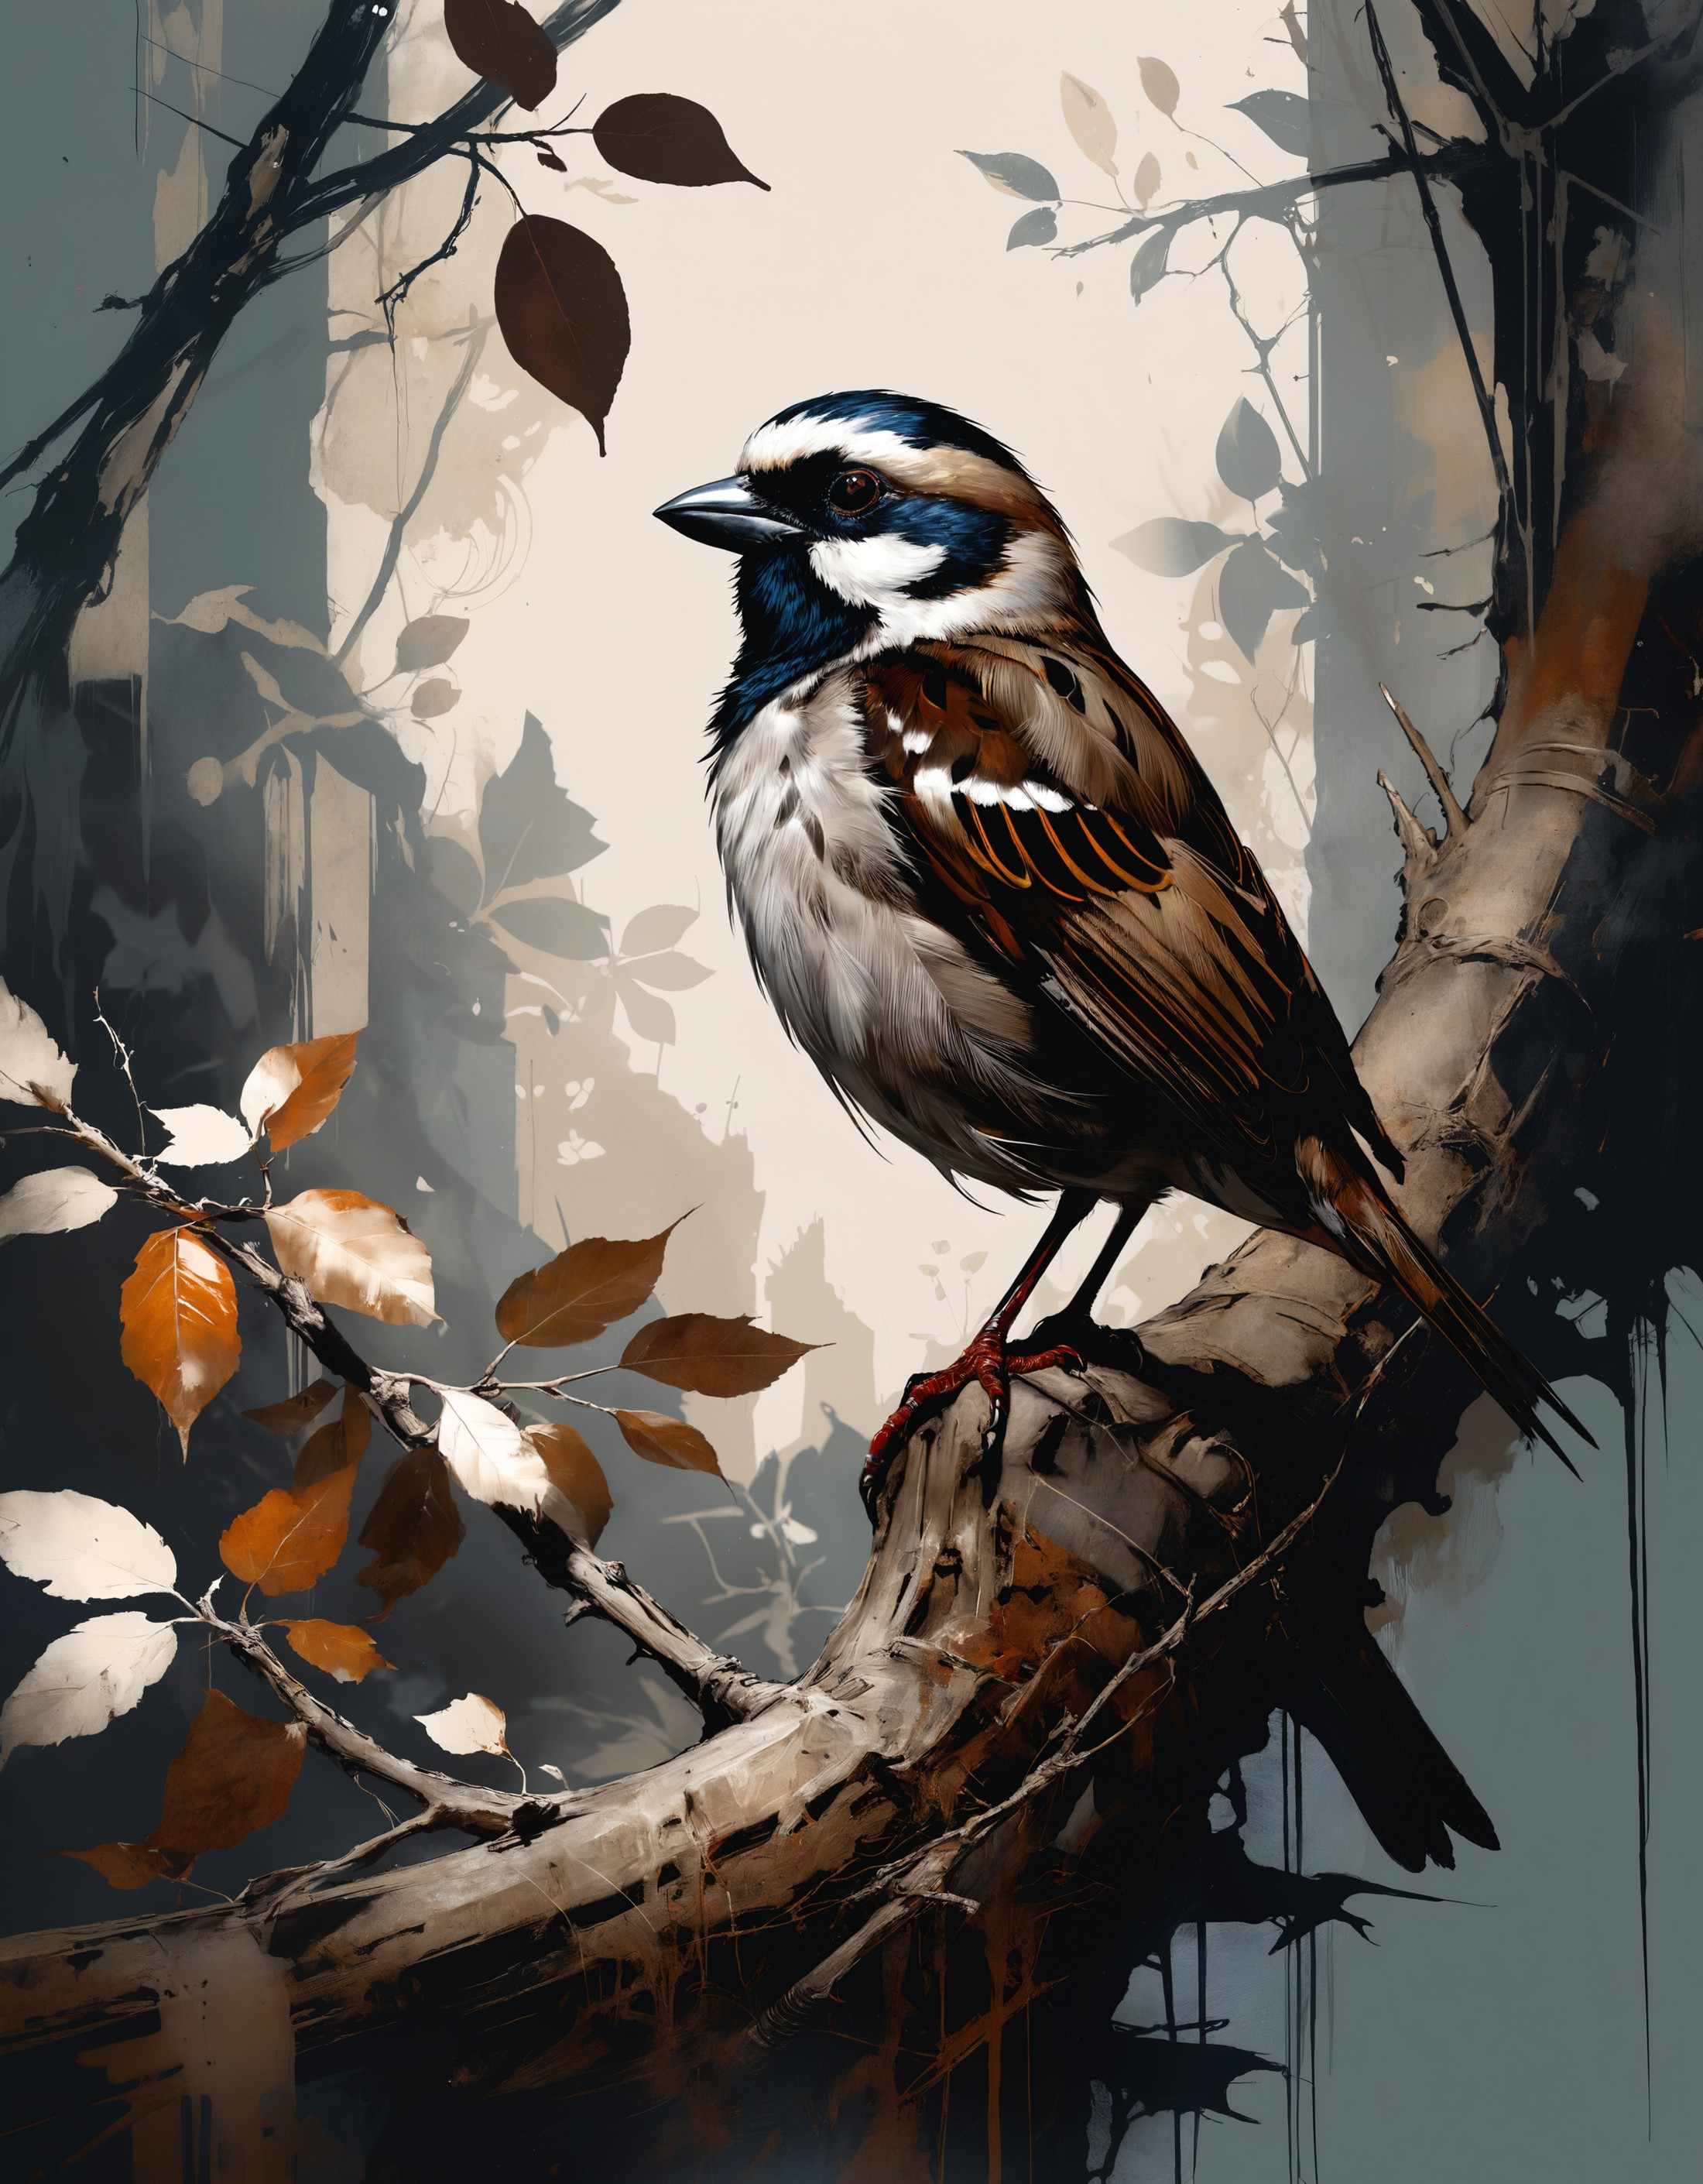 Sparrow in a treetop. Rococo pattern. in a hyperdetailed approach akin to the works of Russ Mills, Alan Lee and Eric Canet...